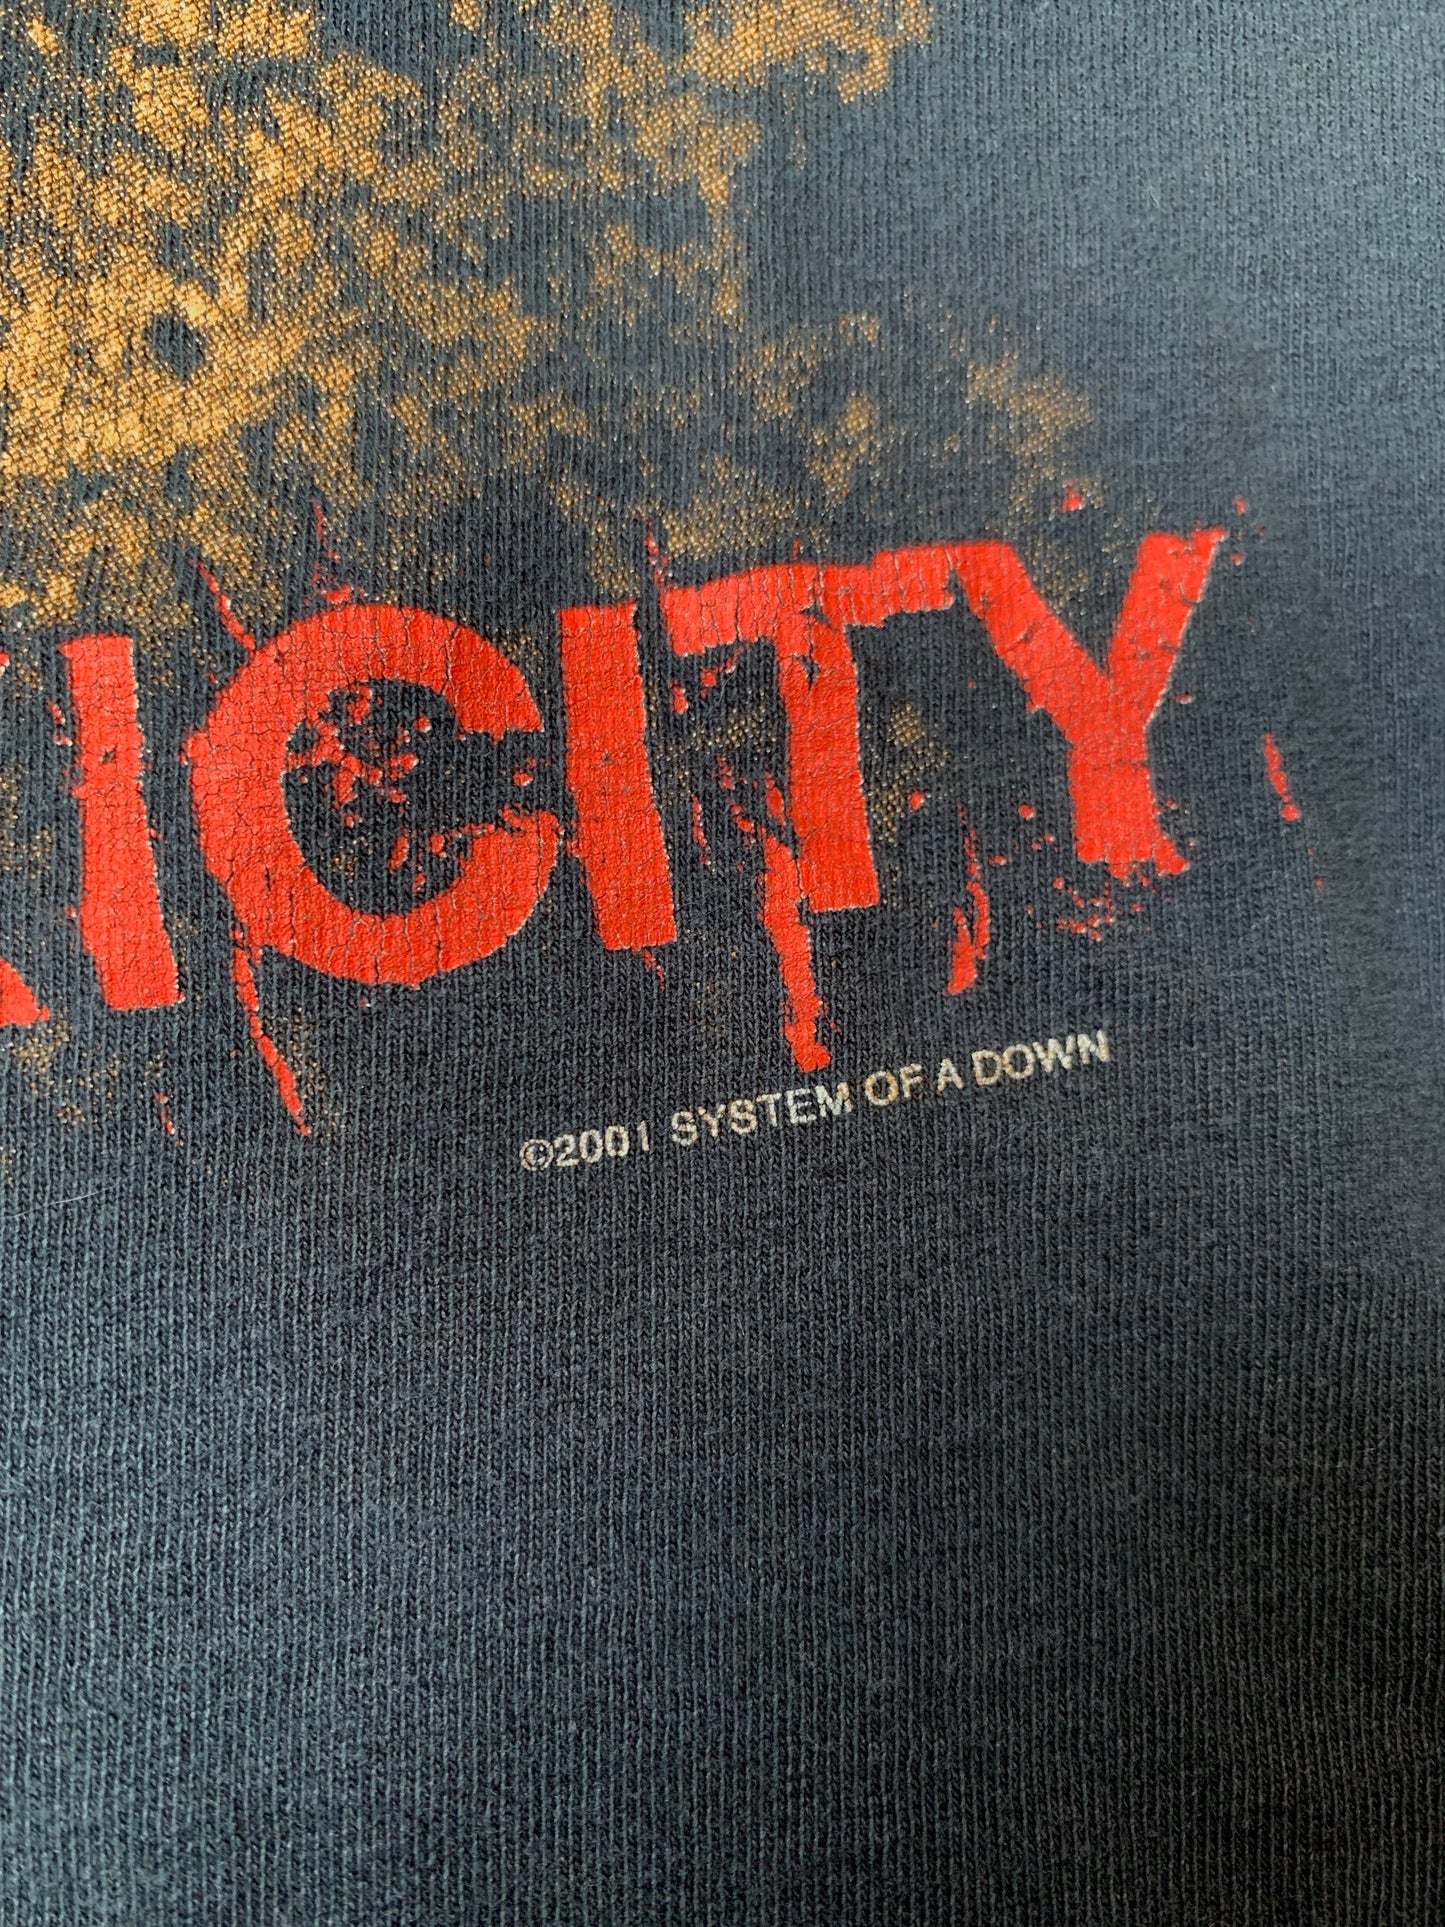 Vintage 2001 System of a Down Toxicity T-Shirt